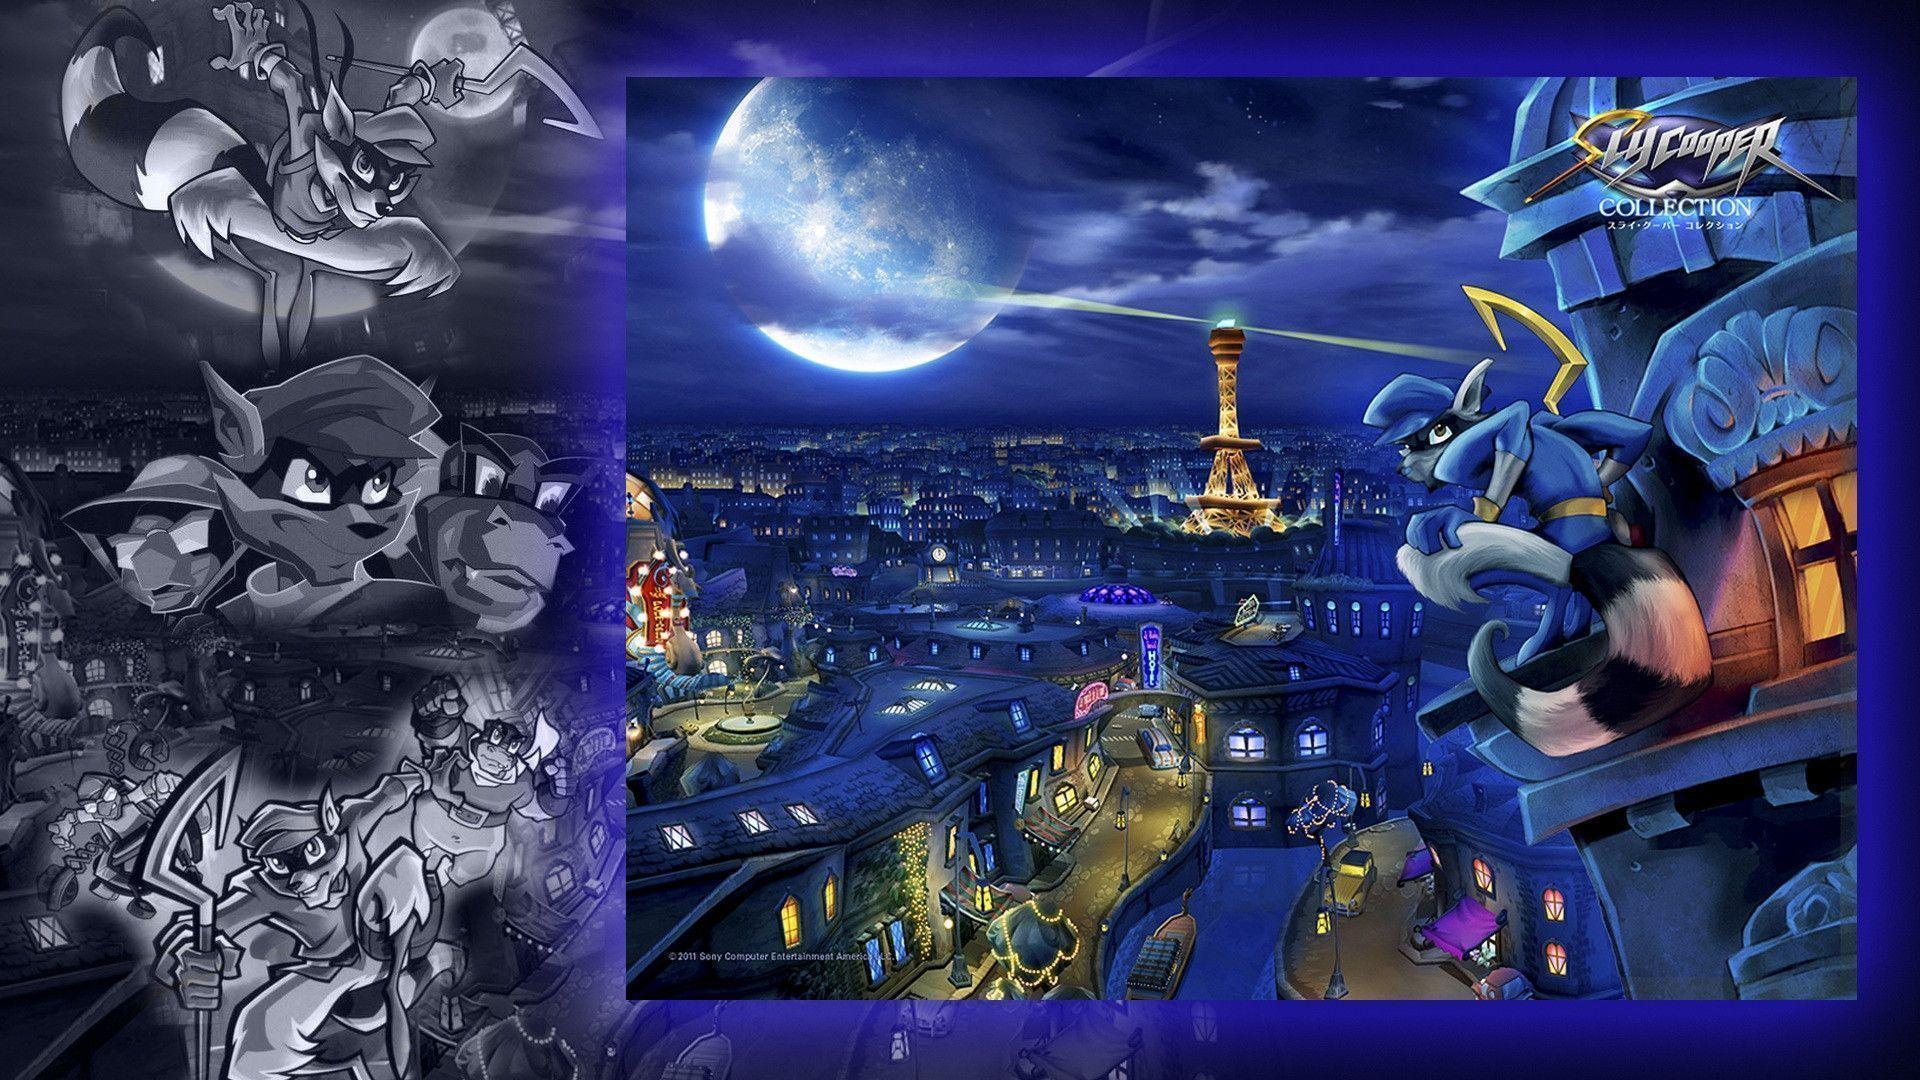 Sly Cooper Wallpapers Wallpaper Cave